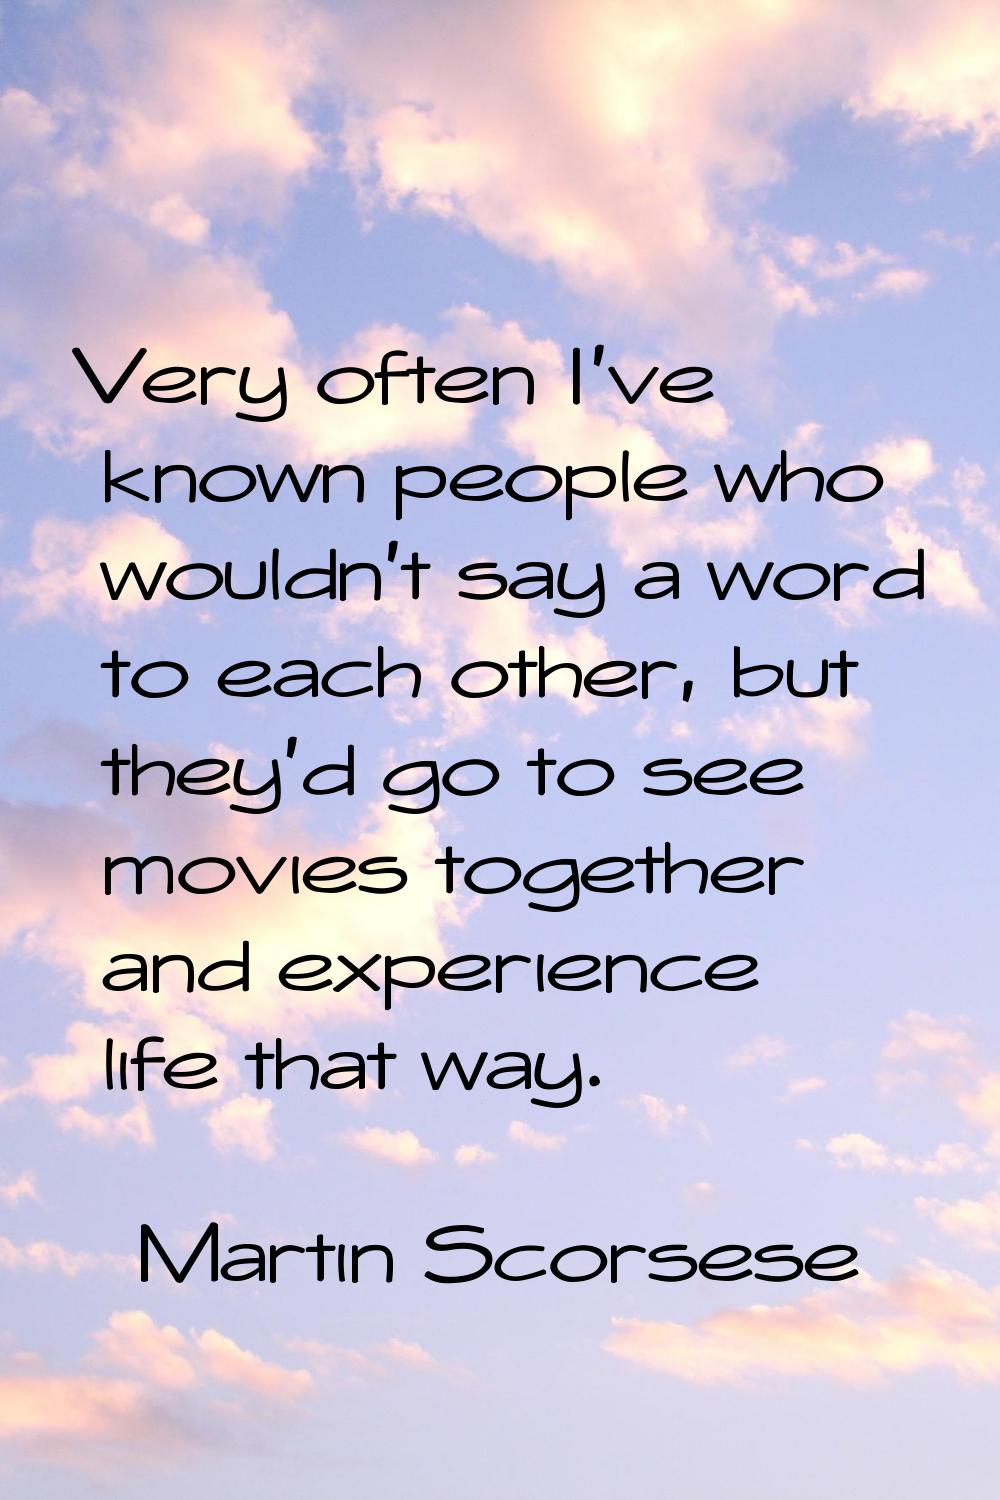 Very often I've known people who wouldn't say a word to each other, but they'd go to see movies tog